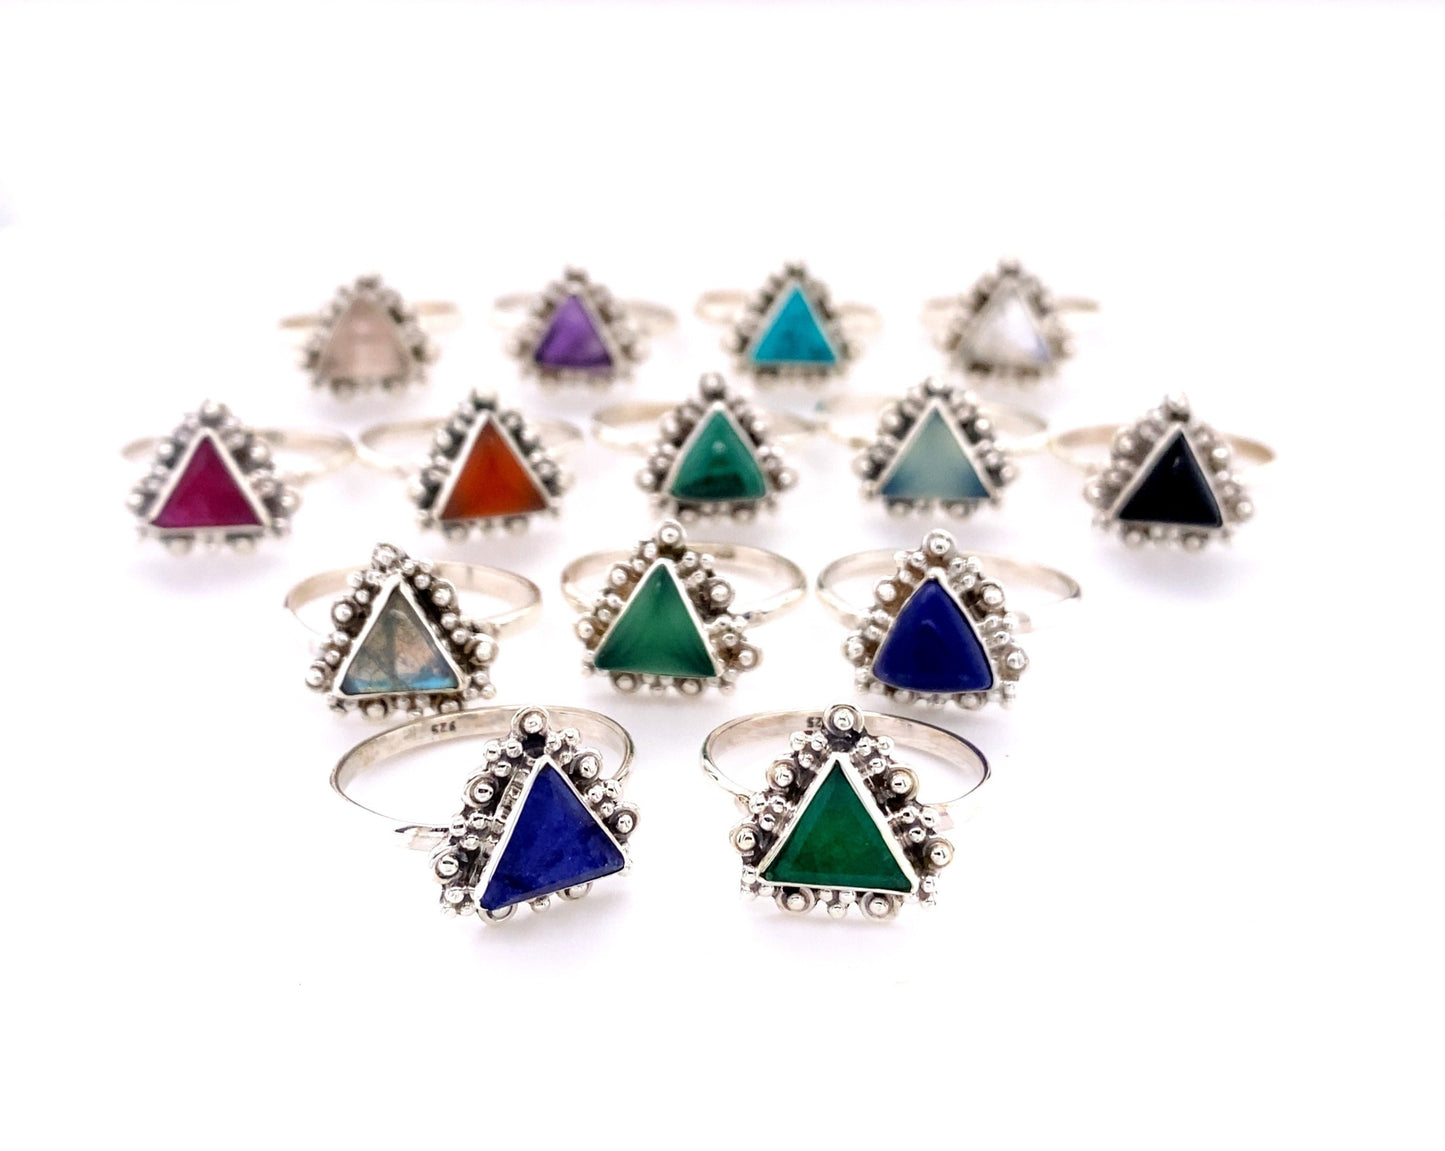 A group of Delicate Gemstone Triangle Rings with different colored stones.